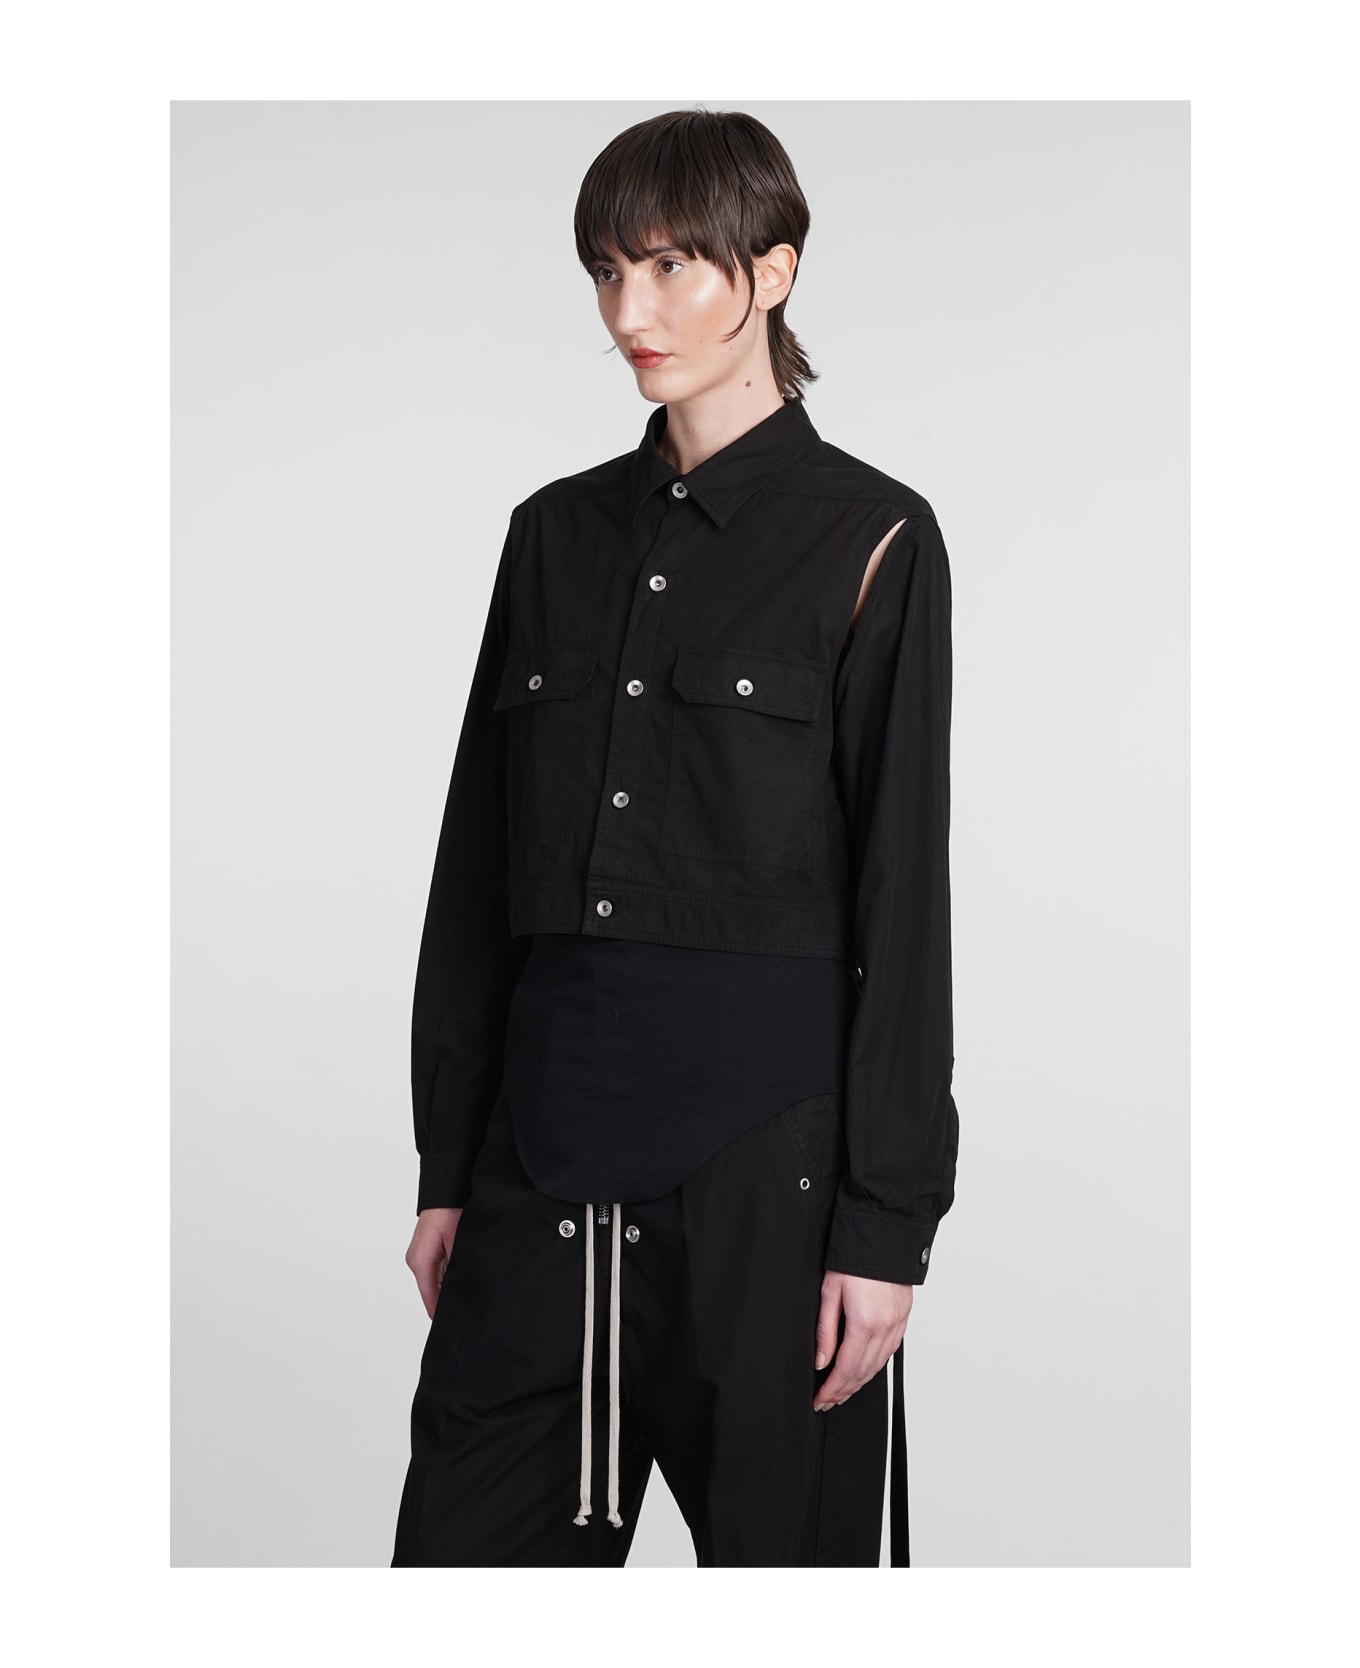 DRKSHDW Cape Sleeve Cropped Casual Jacket In Black Cotton - black シャツ